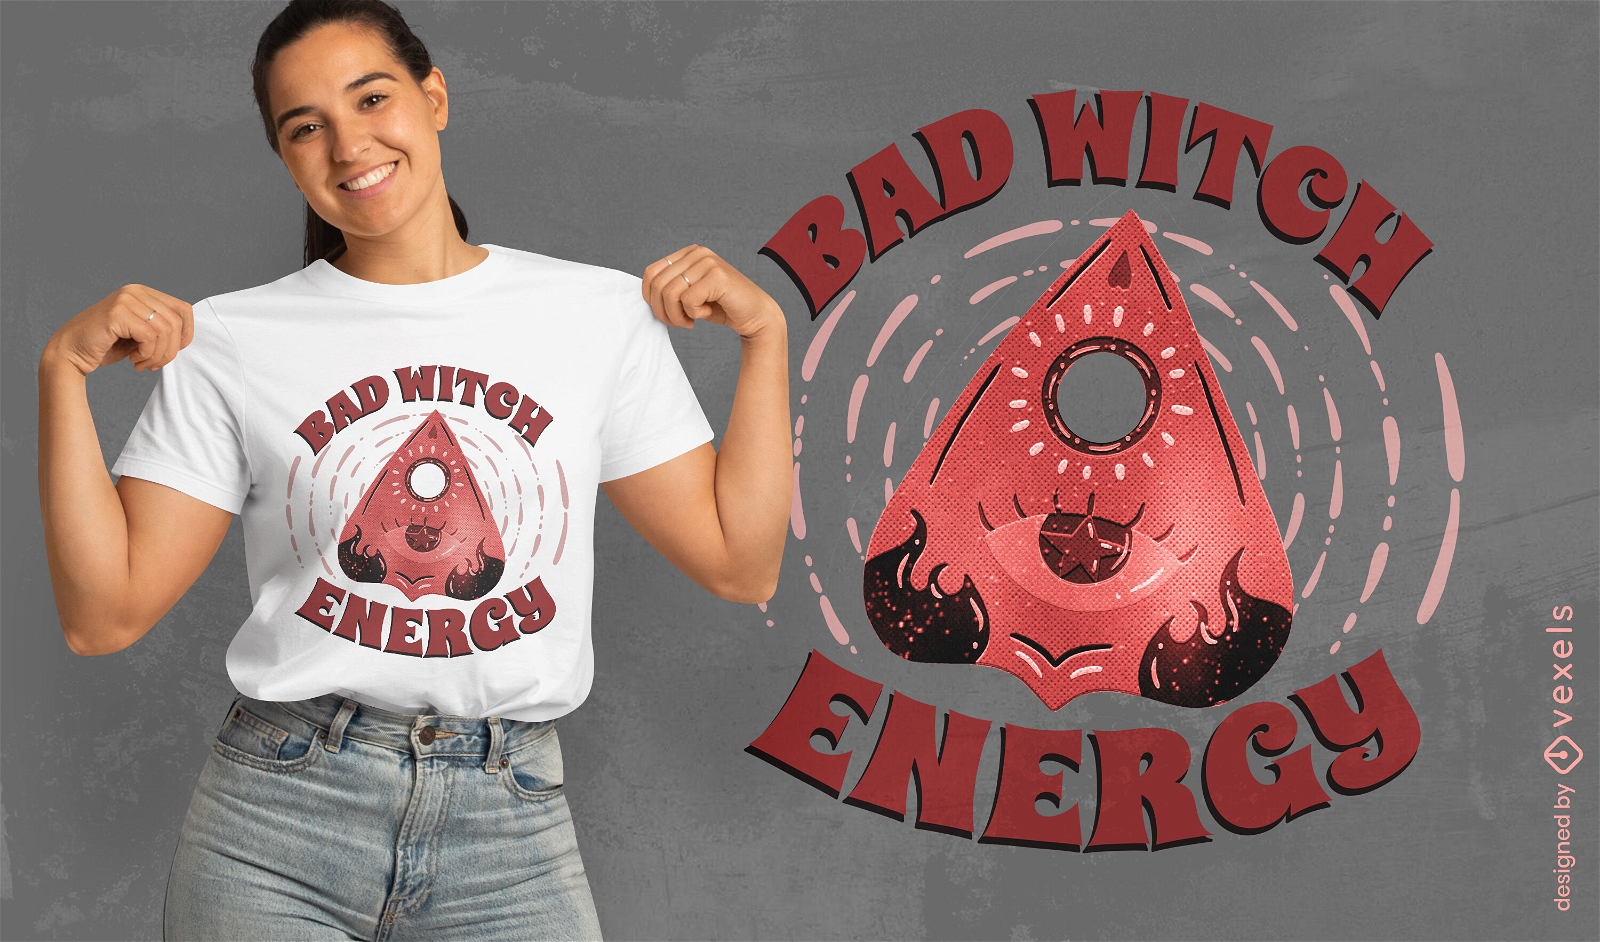 Bad witch energy t-shirt design